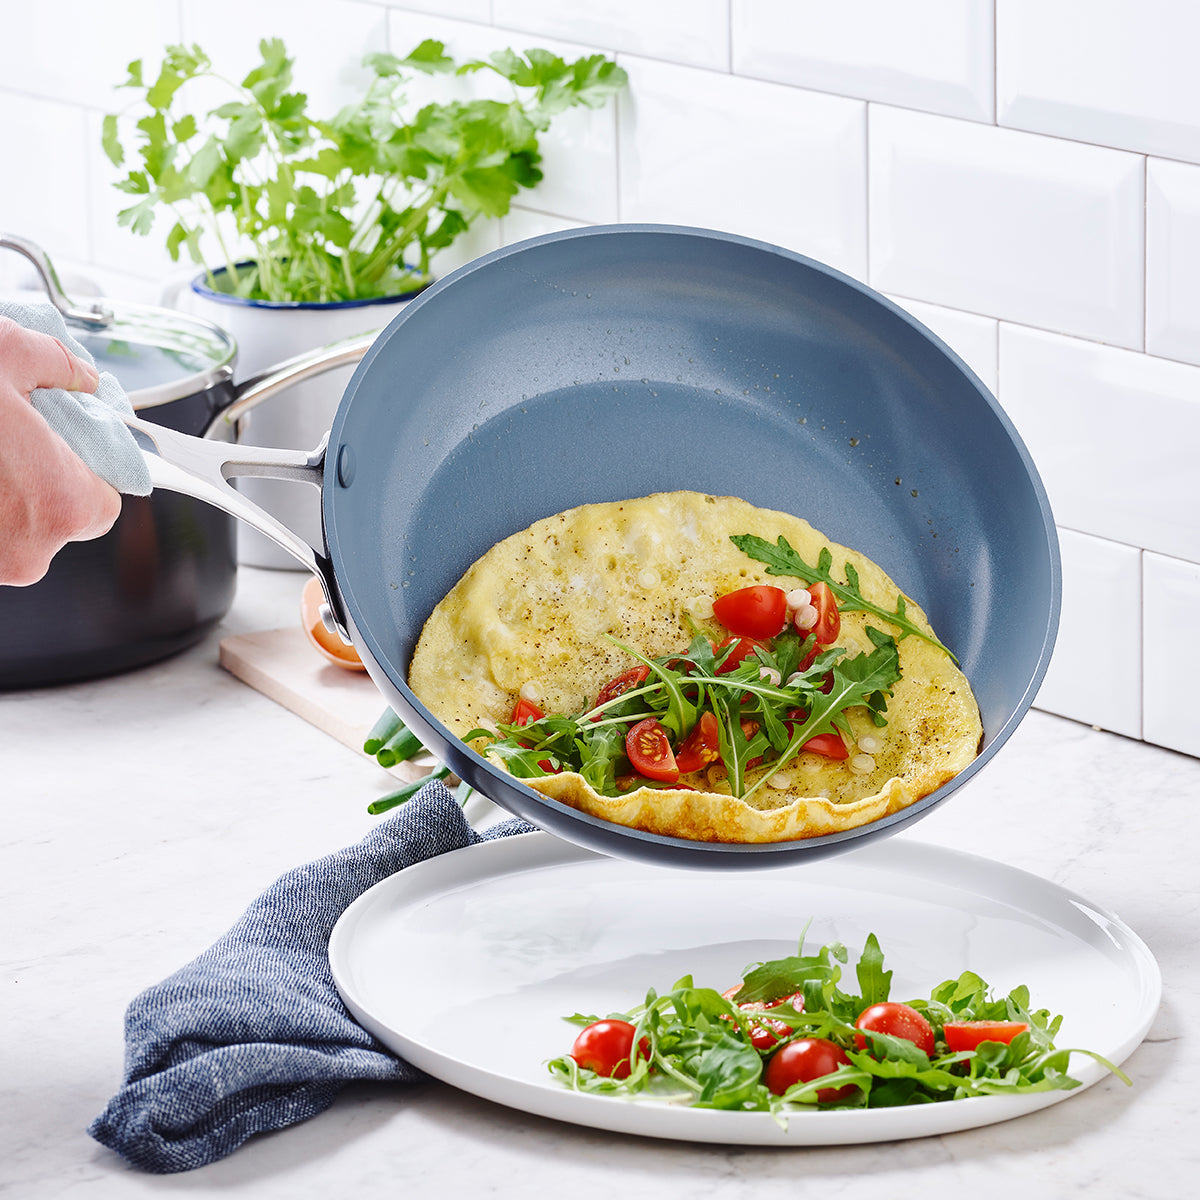 omelet sliding out of fry pan on to plate with greens and tomatoes on it.